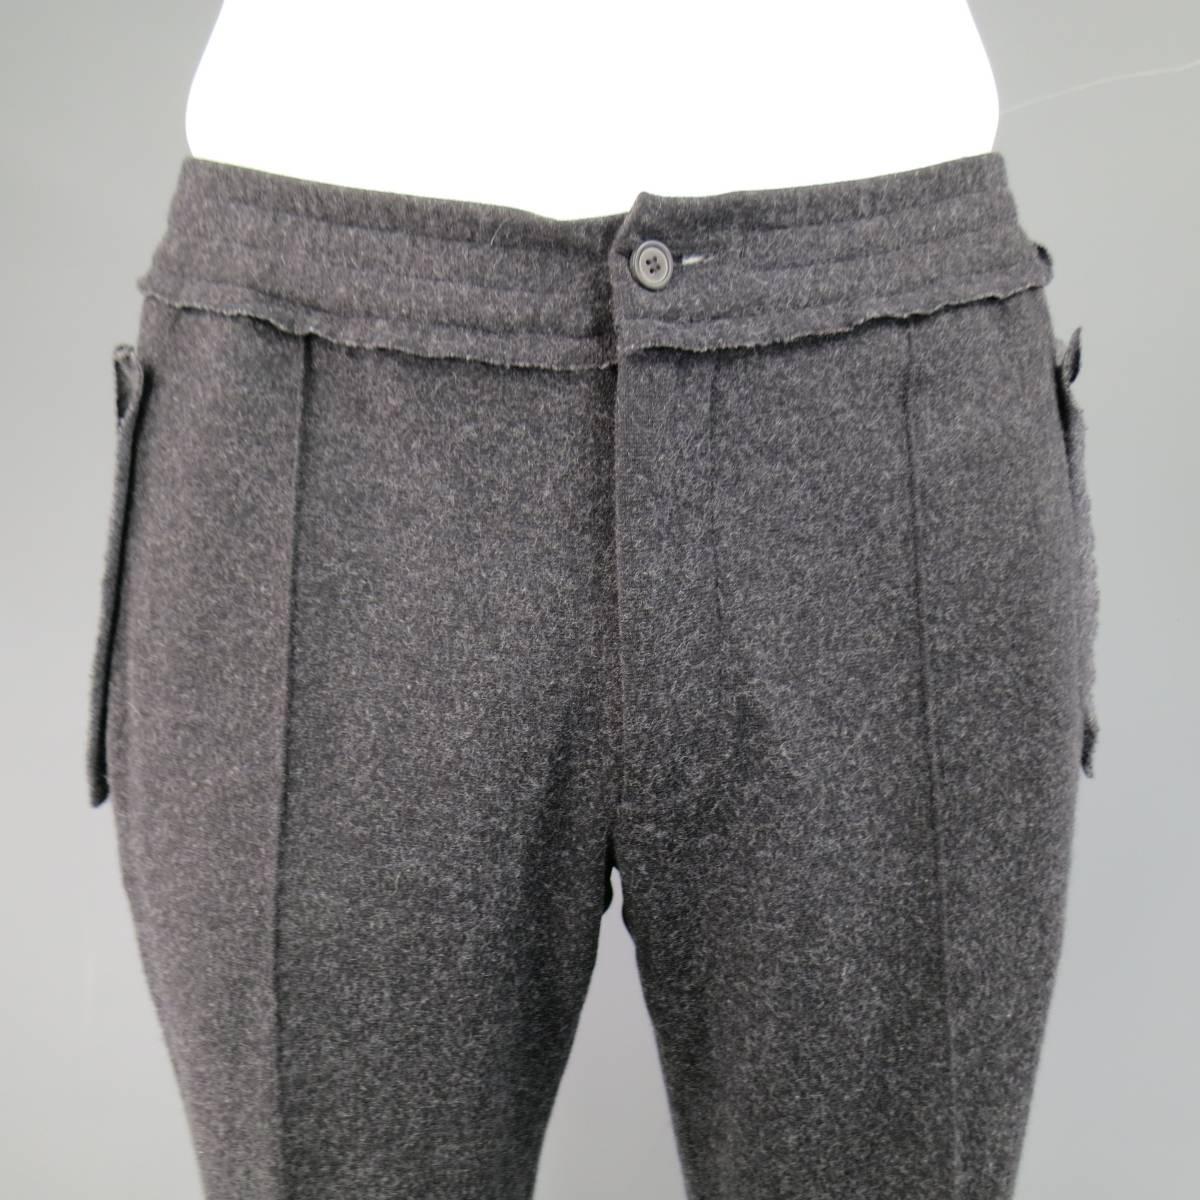 LANVIN trousers in a charcoal Heather gray stretch wool flannel features an elastic, waistband with internal drawstring, stitched flat front, raw edge reverse seam sides, and slit pockets with raw edge appliques.
 
Excellent Pre-Owned